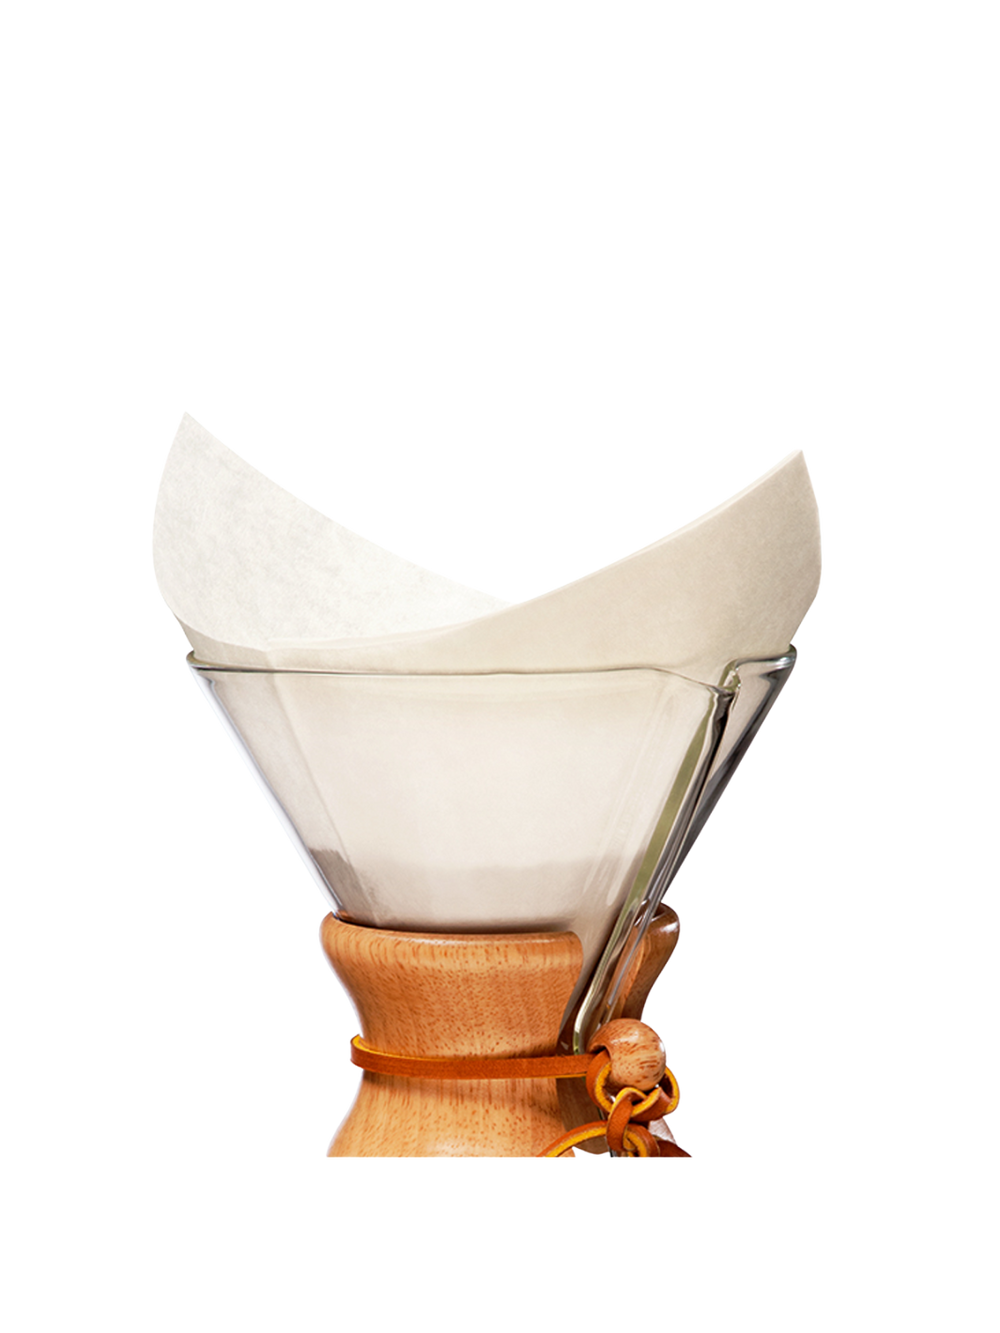 https://cdn.shopify.com/s/files/1/2404/0687/products/chemex_filter-squares.png?v=1663339142&width=1000